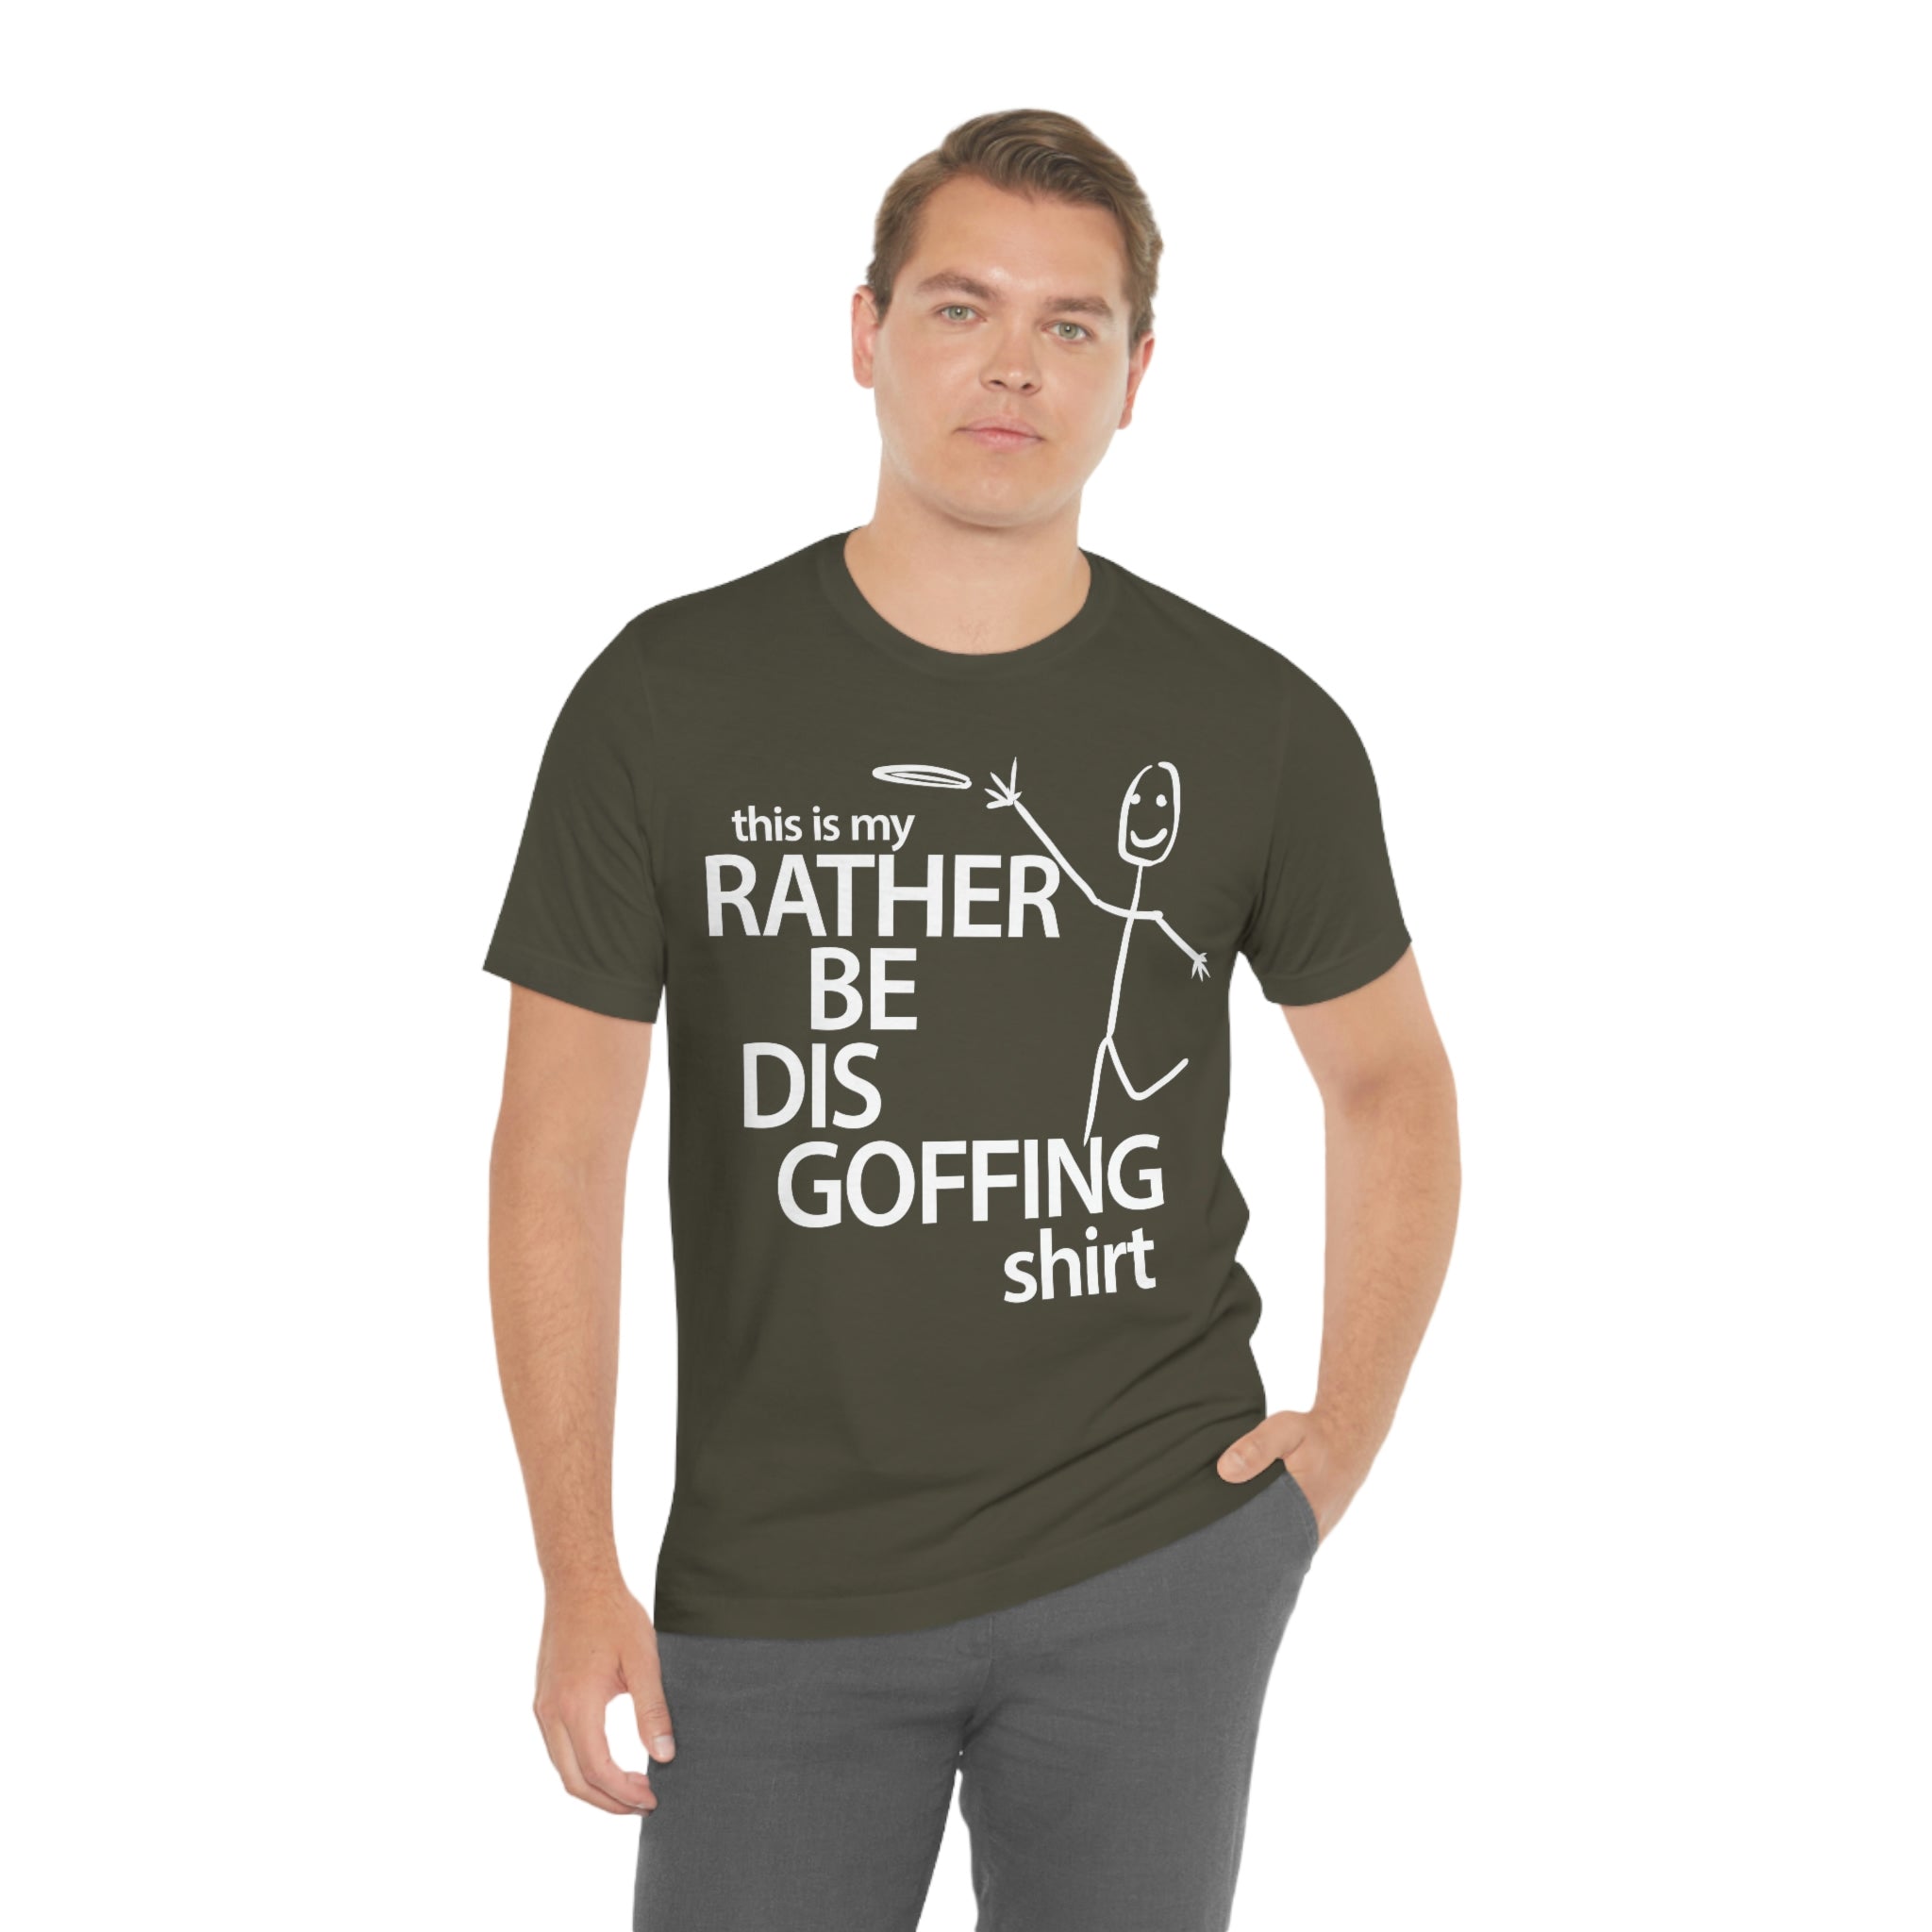 Rather Be Dis Goffing Tee